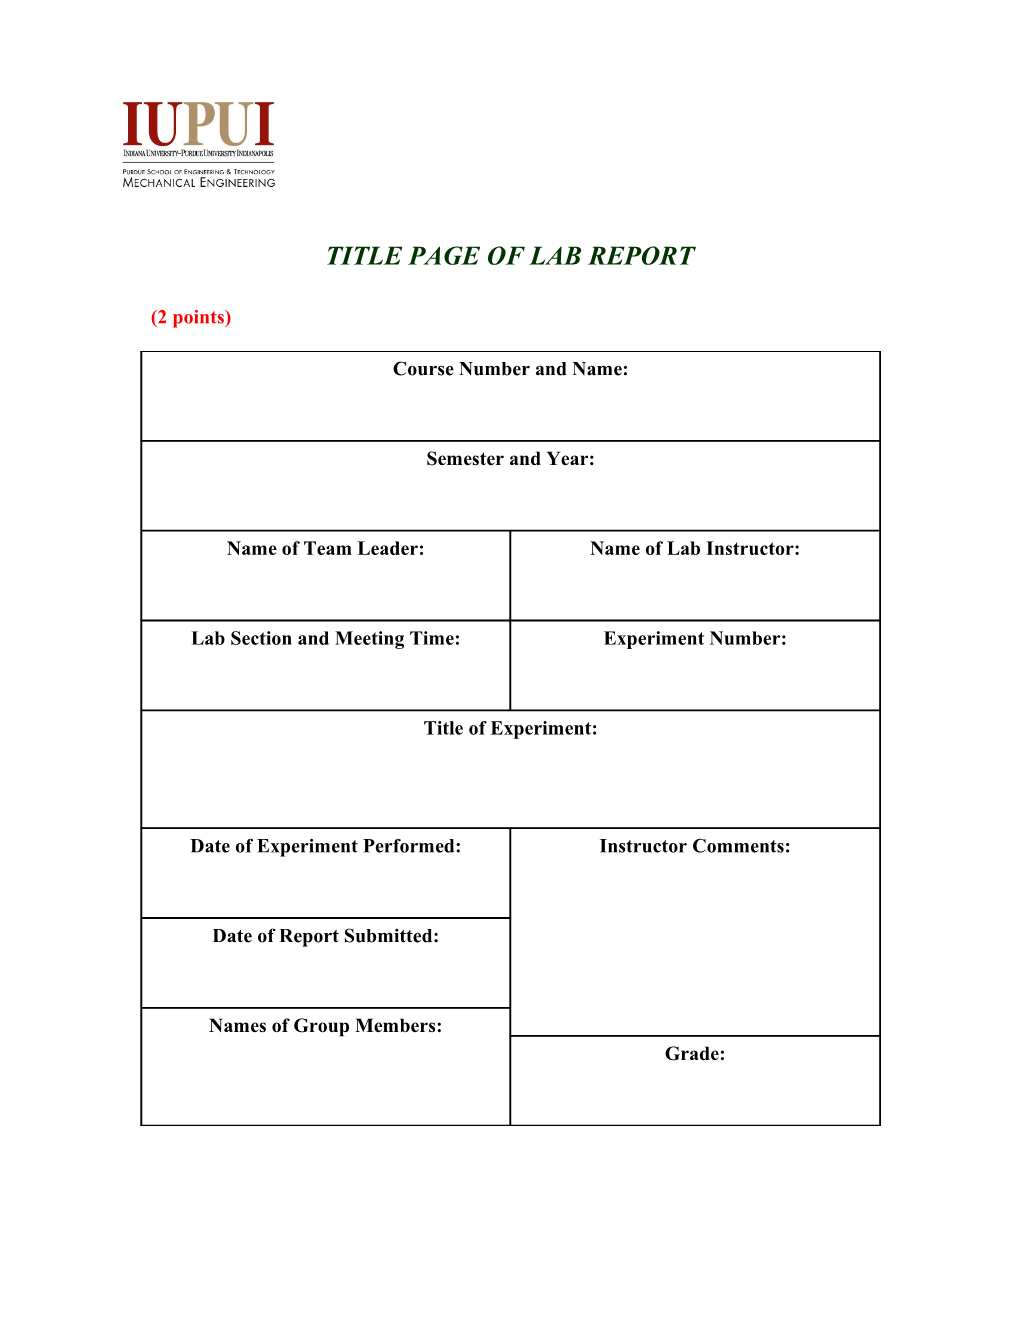 The Following Template, Including the Title Page,Has Been Prepared to Guide the Students